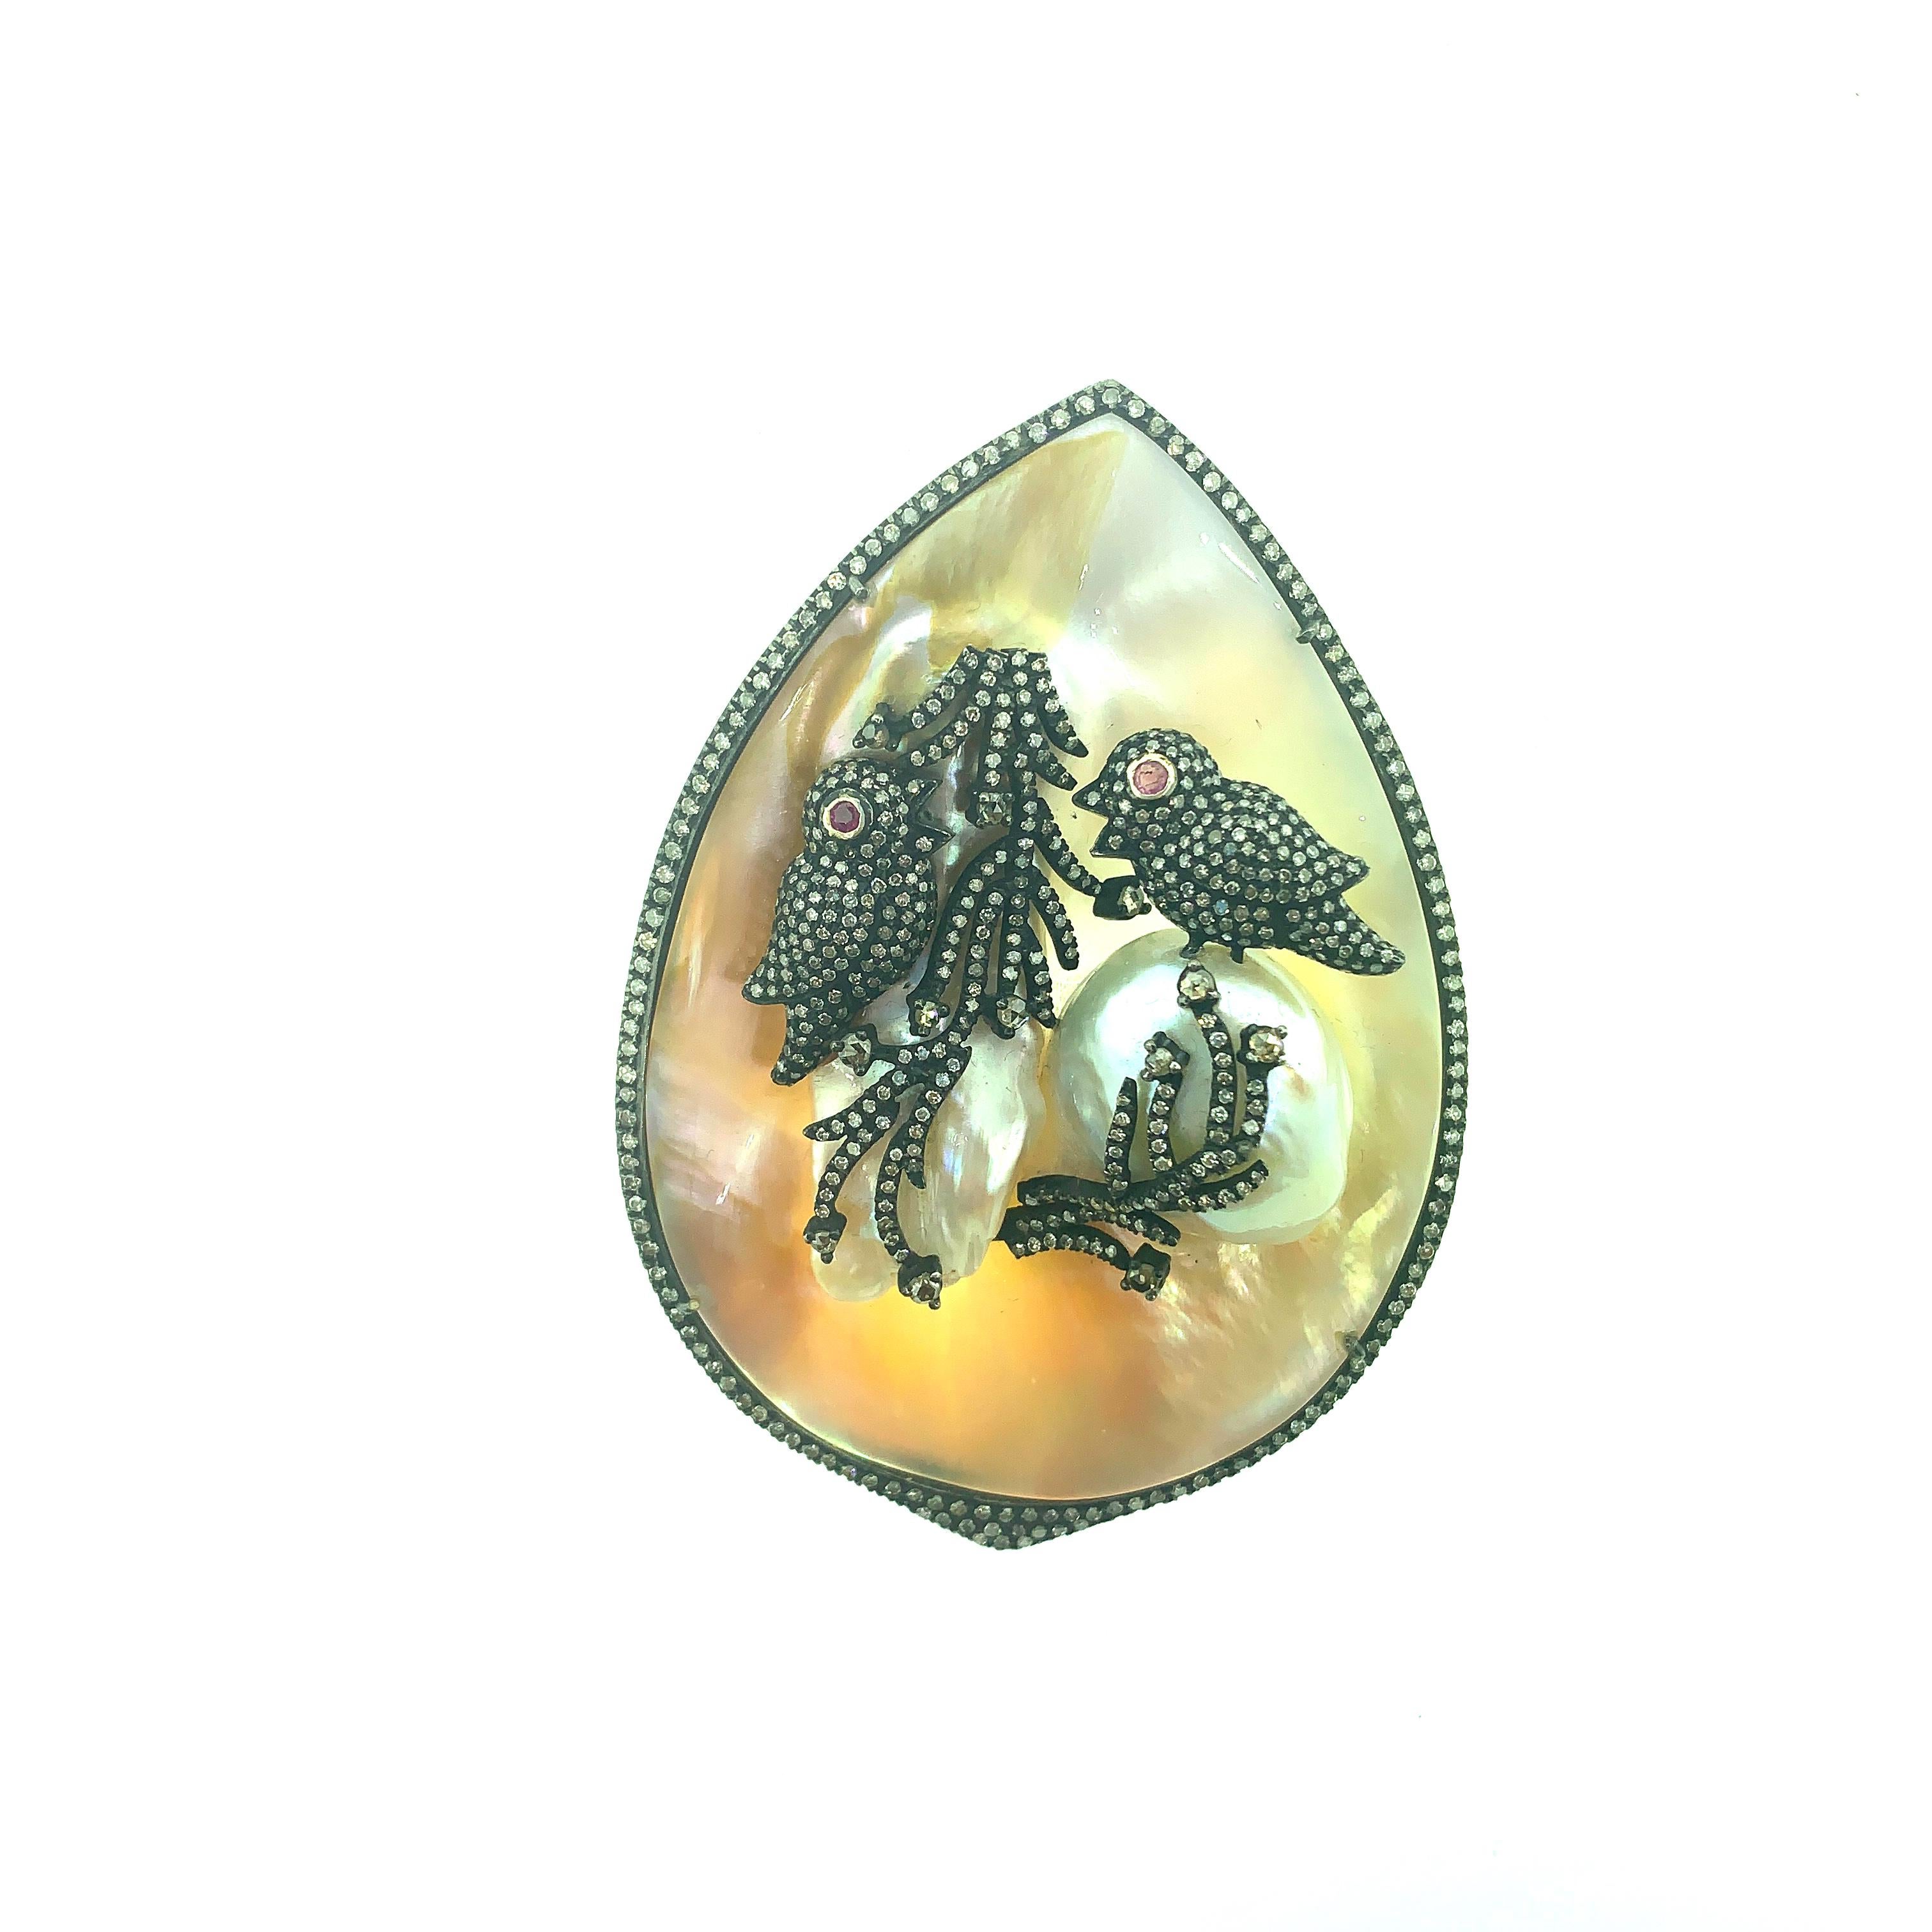 Contemporary 117.31 Ct Mother of Pearl Birds Pendant in Oxidized Sterling Silver, 14Kt Gold For Sale